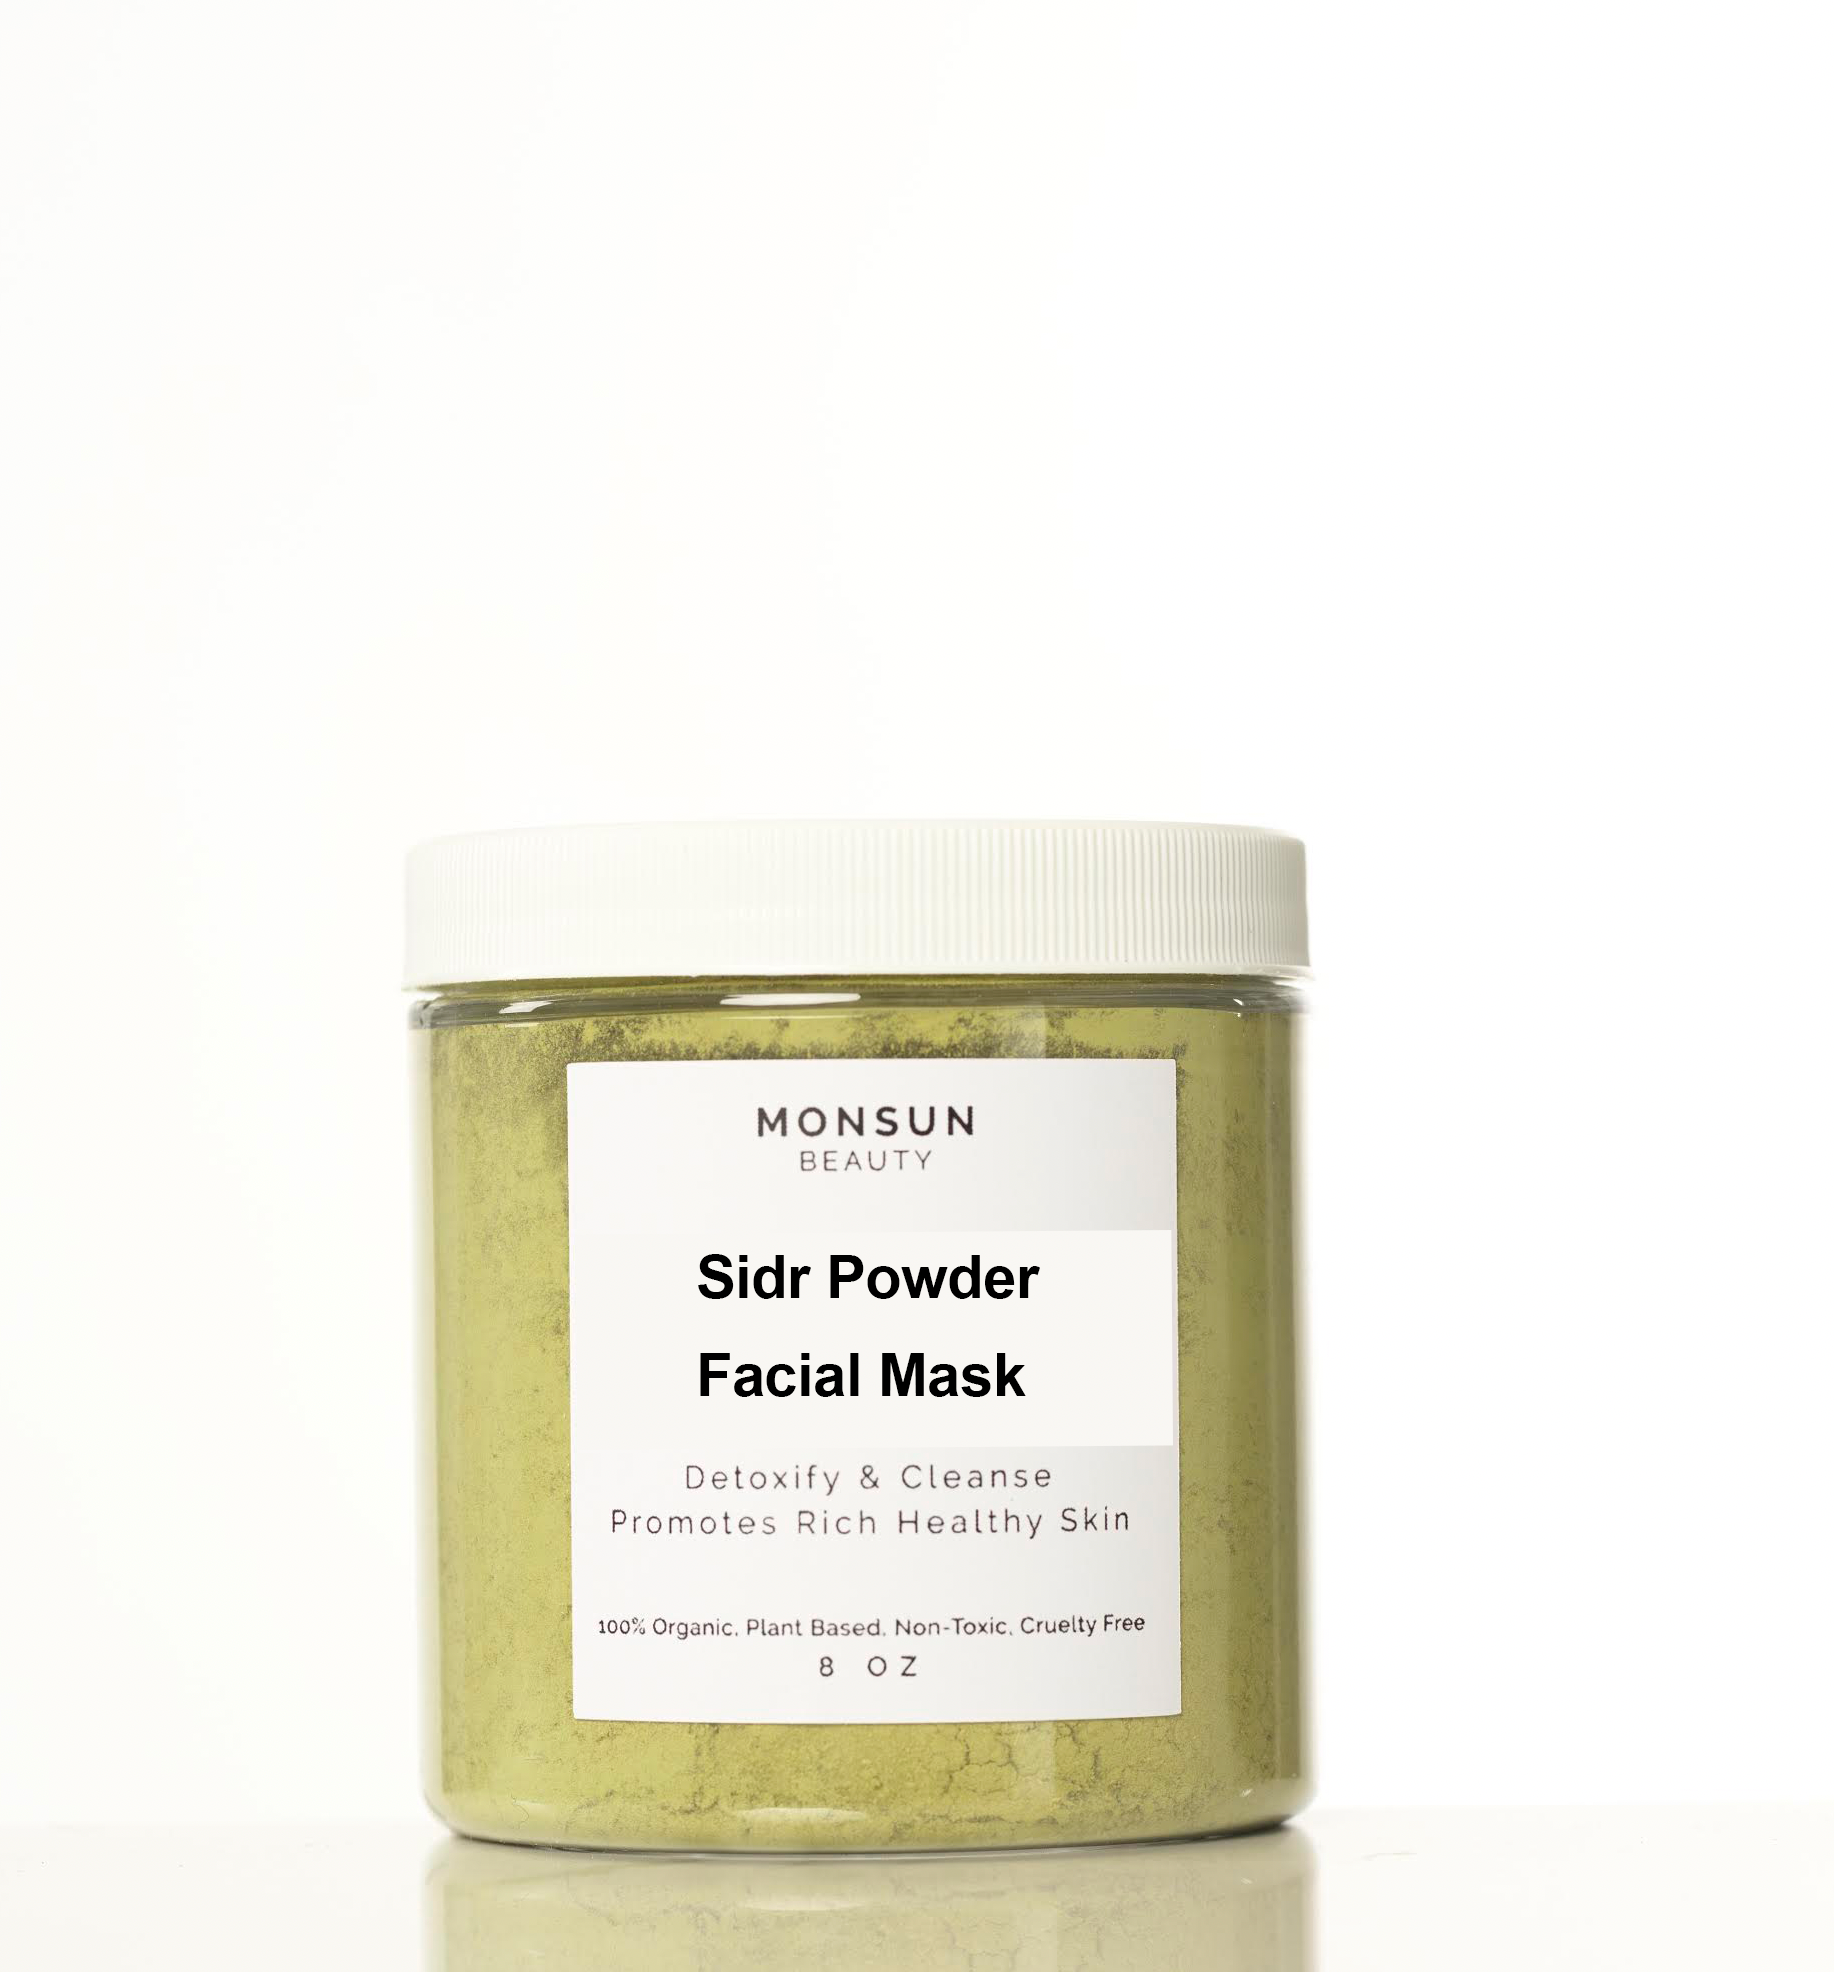 Sidr powder for face and hair mask